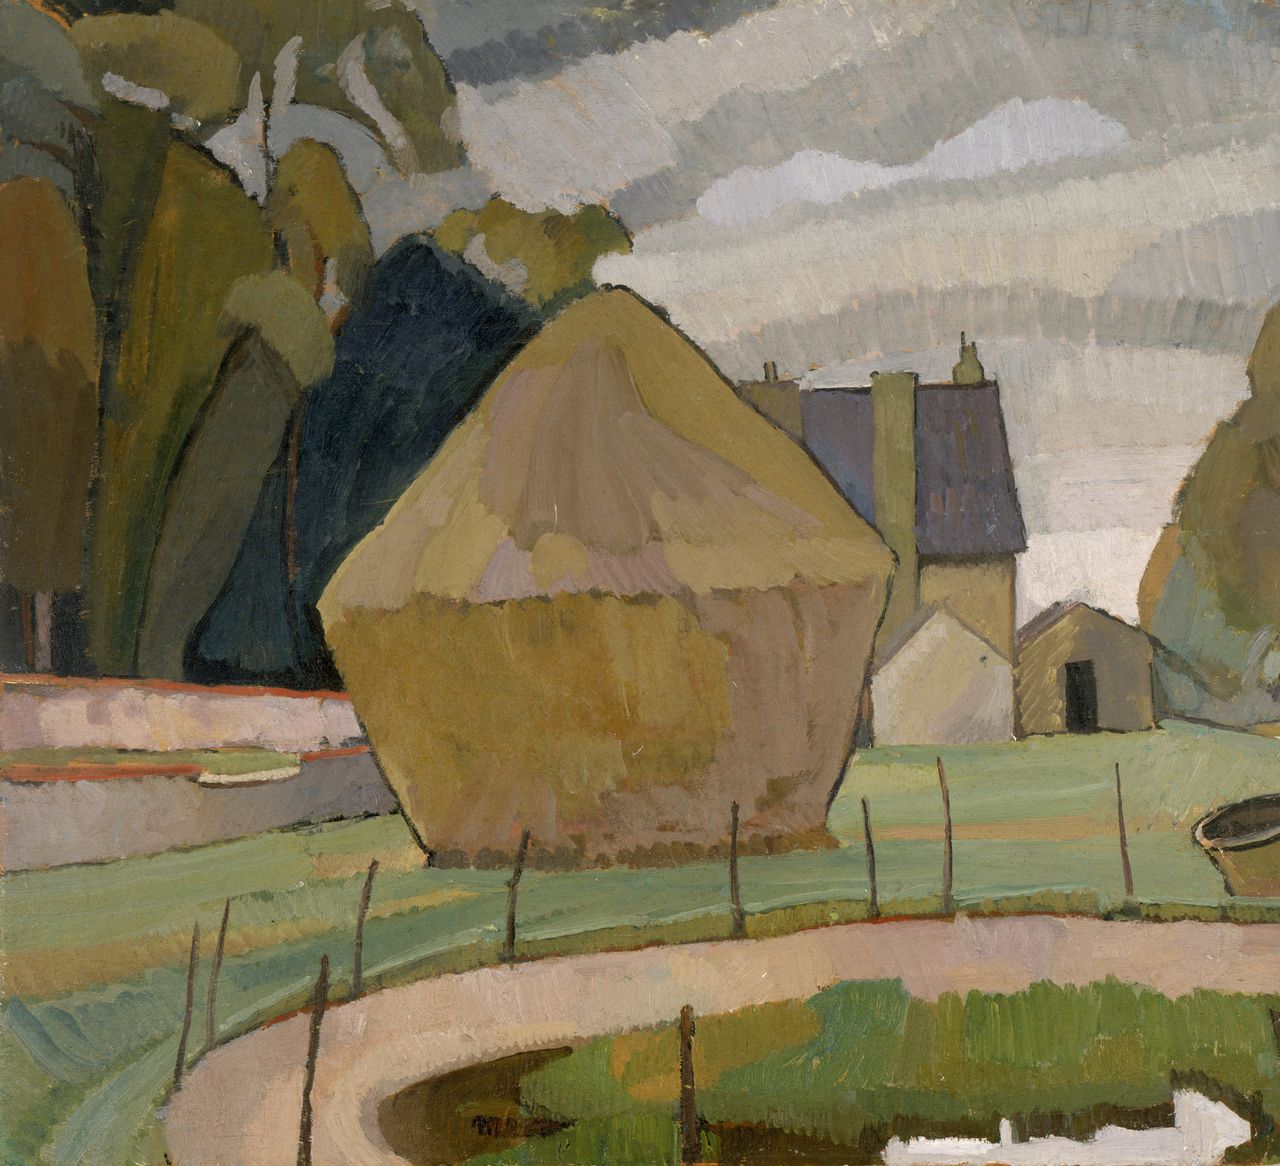 "Landscape with Haystack," Asheham, 1912, oil on canvas, board: 60.32 x 65.72 cm, Smith College Museum of Art, Northampton, Massachusetts. Purchased with the gift of Anne Holden Kieckhefer class of 1952, in honour of Ruth Chandler Holden, class of 1926. © The Estate of Vanessa Bell, courtesy of Henrietta Garnett